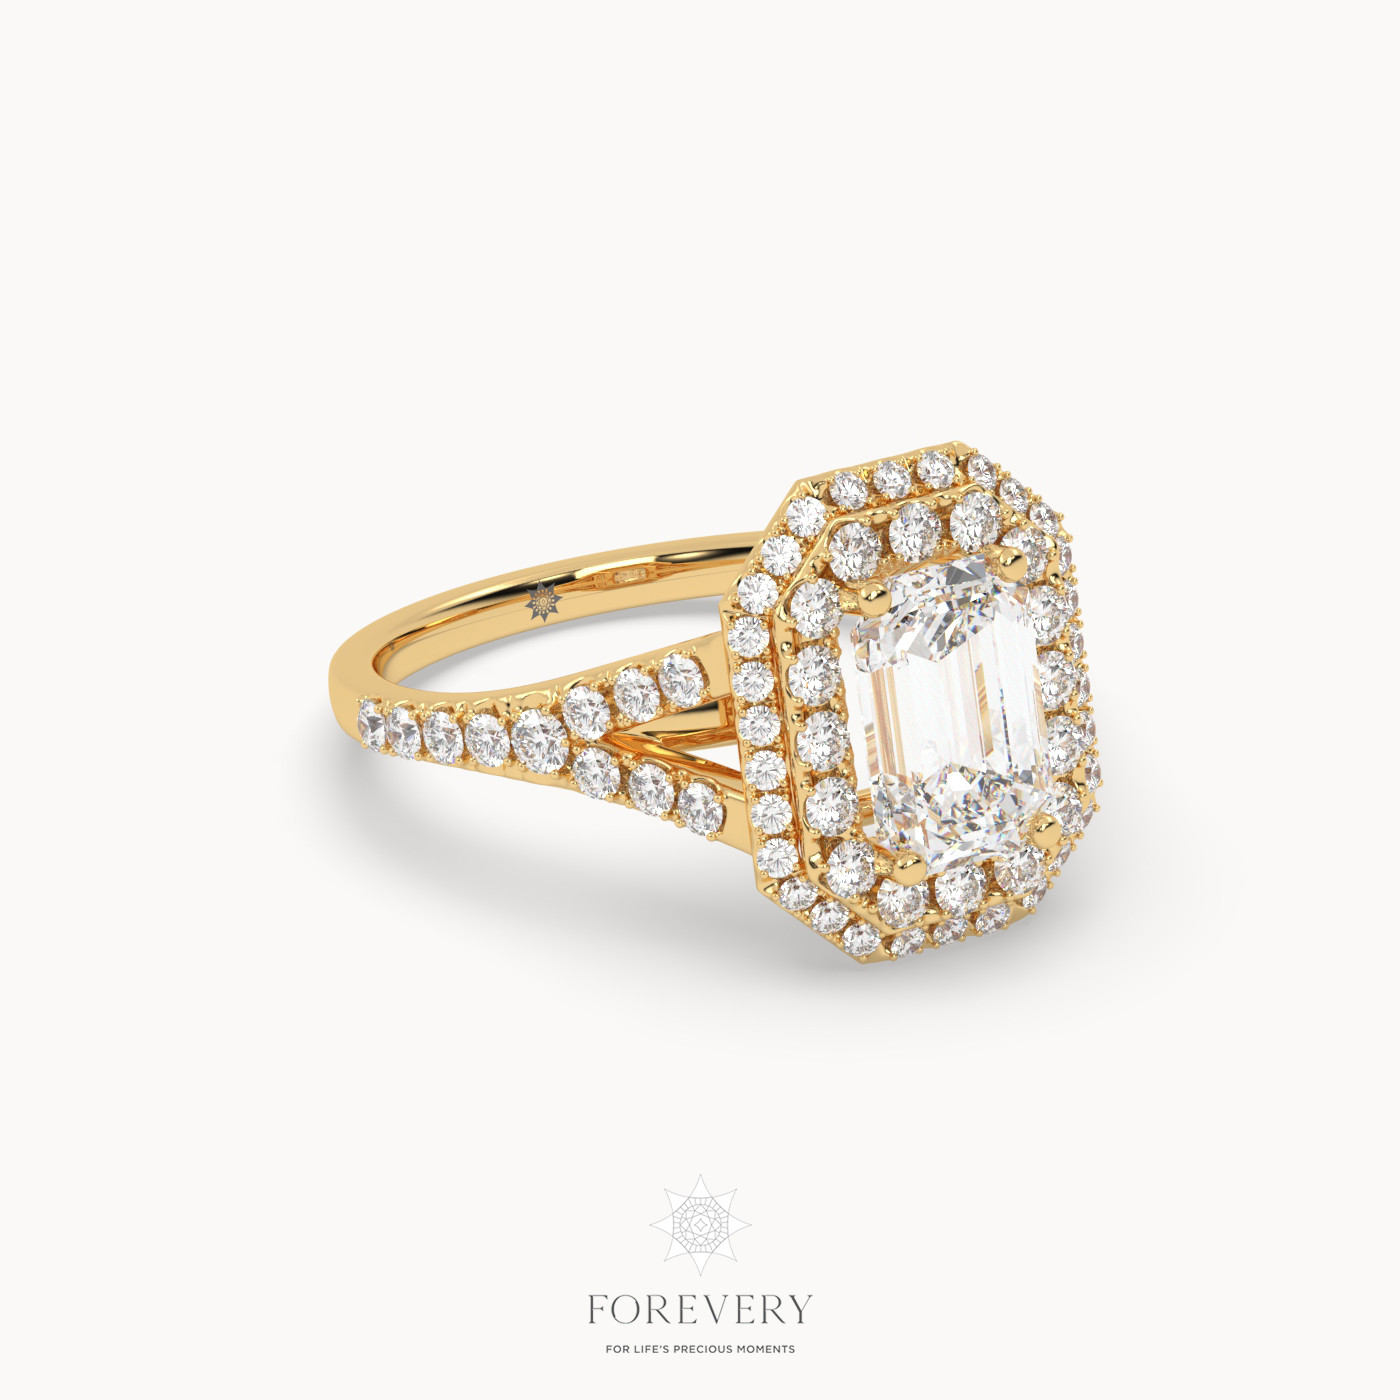 18K YELLOW GOLD Emerald Diamond Vintage Double Halo Pave Ring